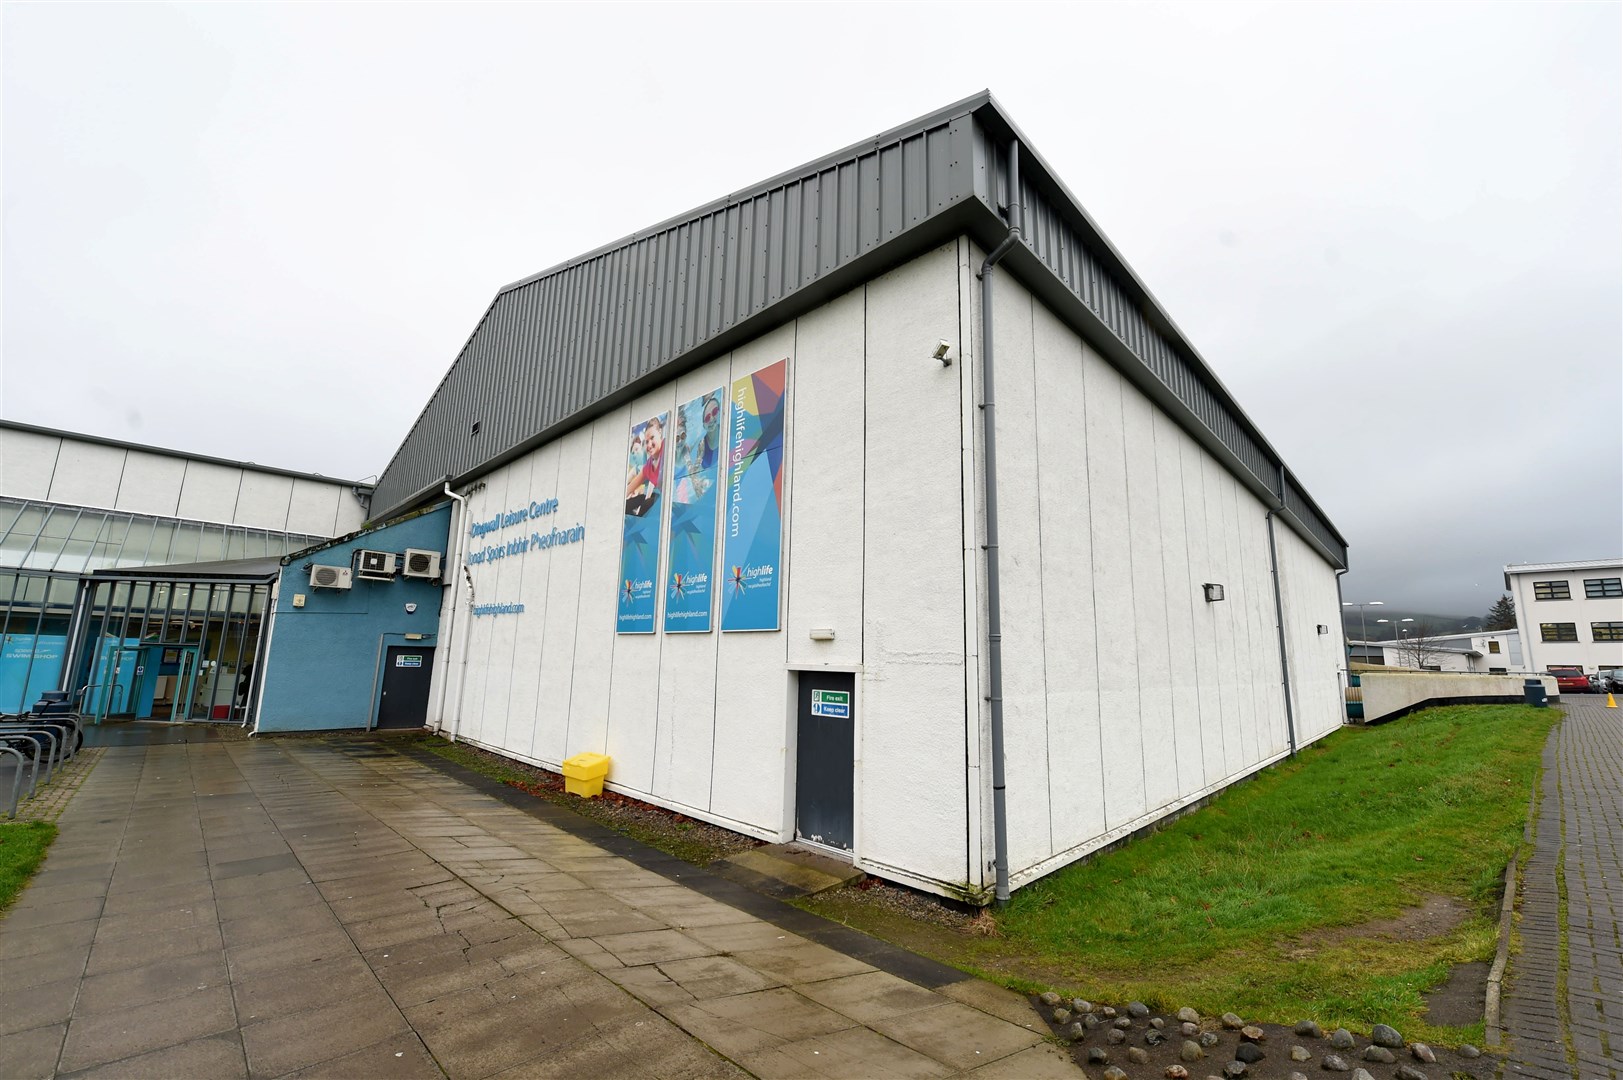 Dingwall Leisure Centre has been closed as its gym is upgraded.